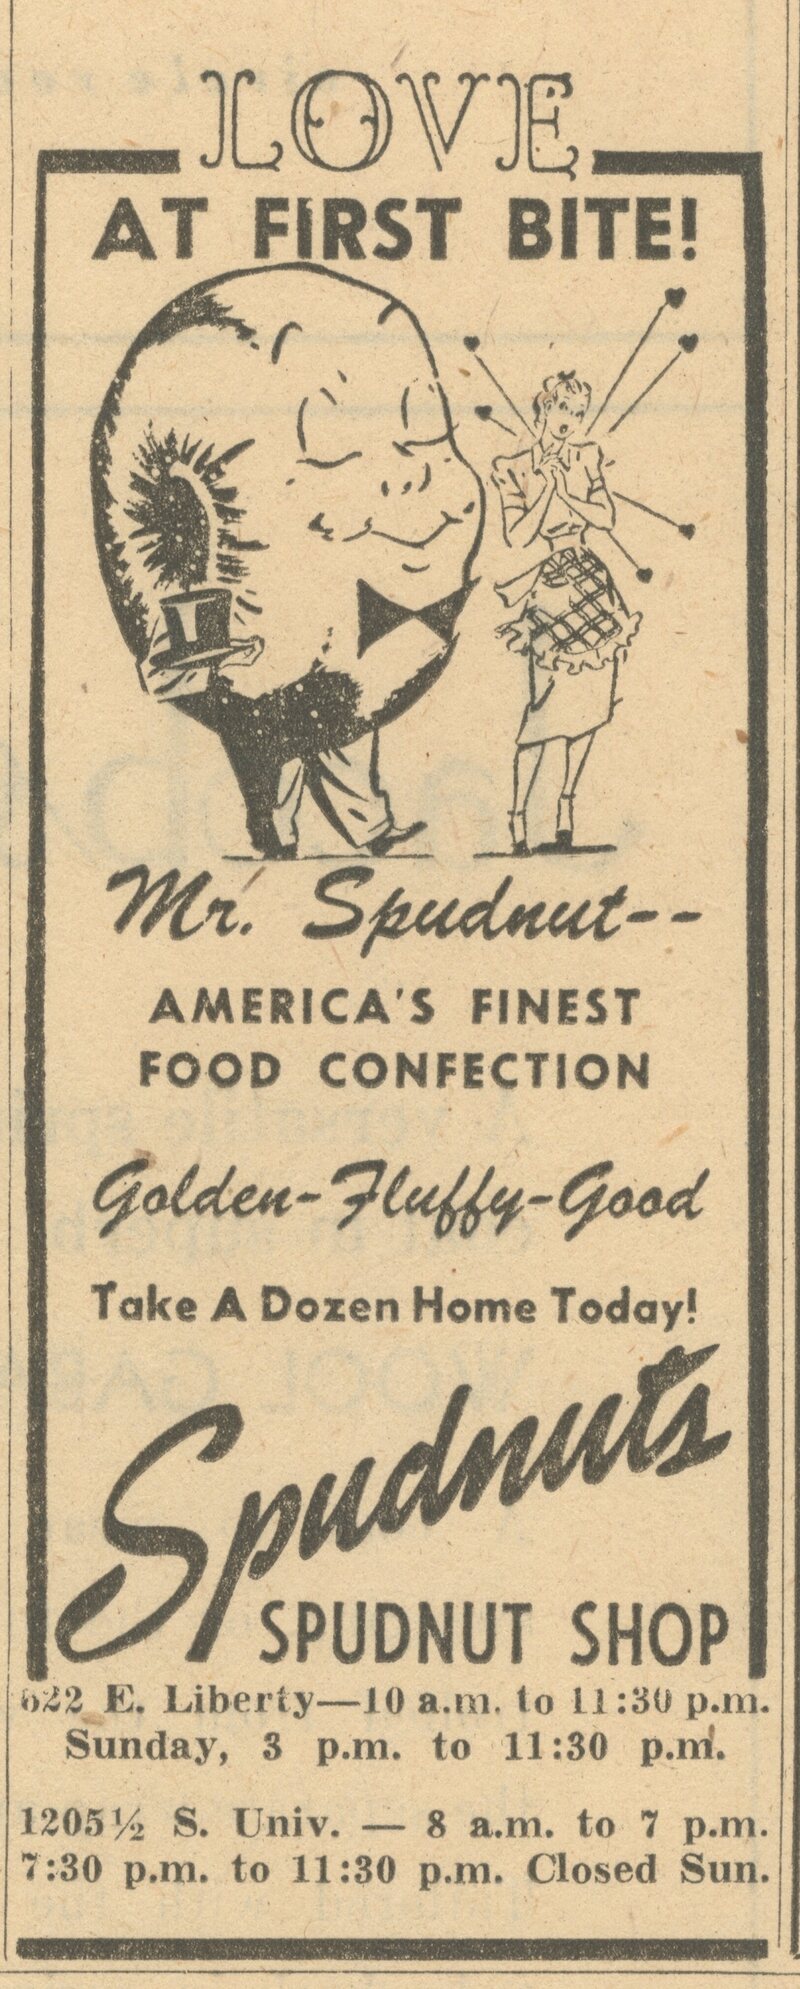 Mr. Spudnut swears by "America's finest food confection."